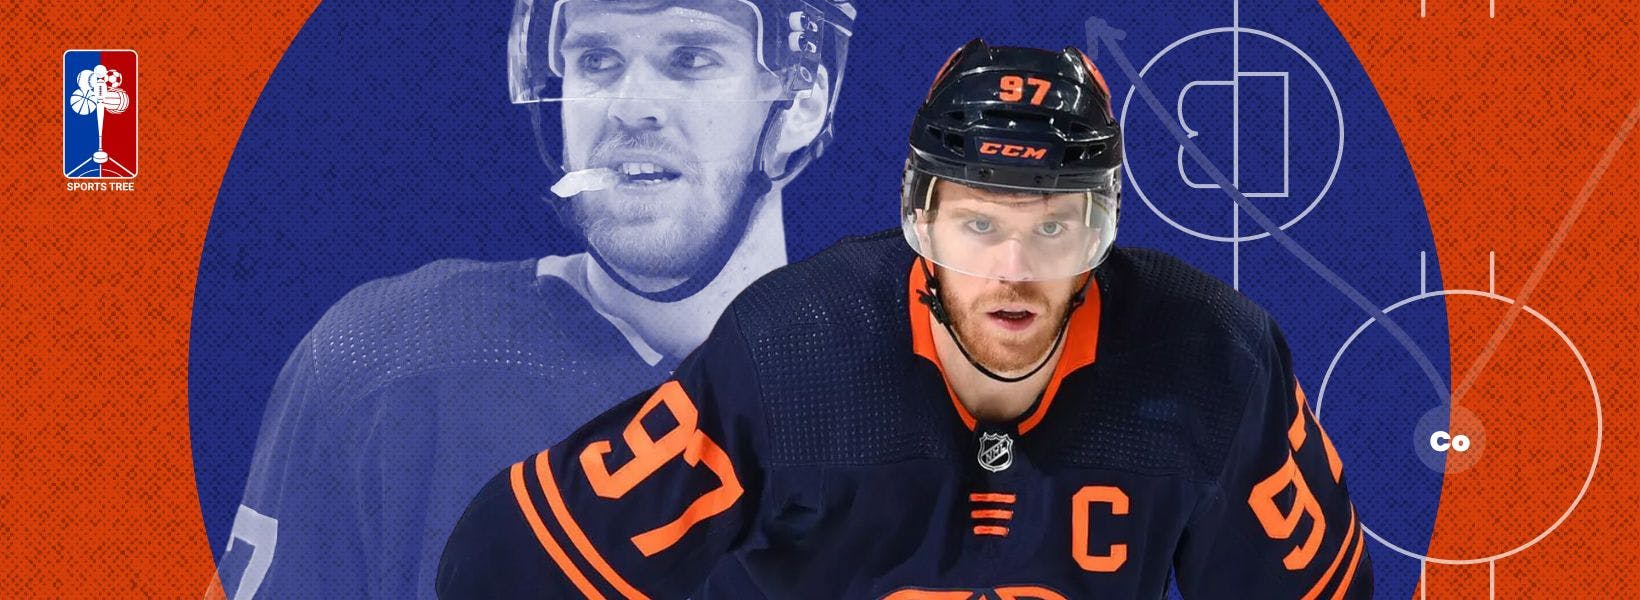 Connor McDavid has hit 50 goals this season after pocketing two last night against the Boston Bruins, in only 61 games